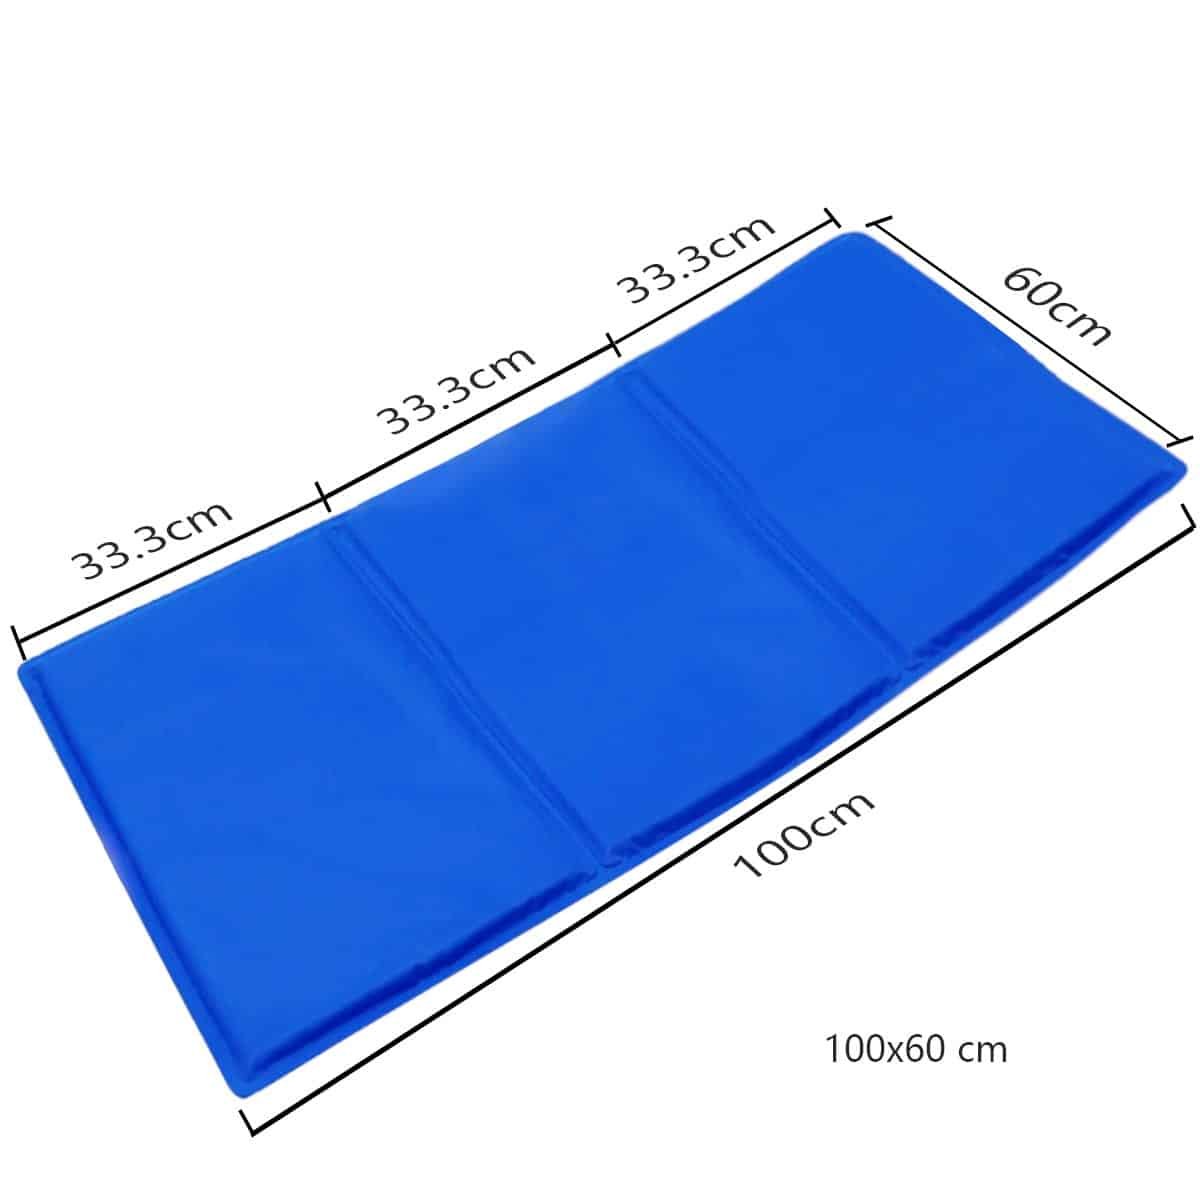 size100x60 cooling mat